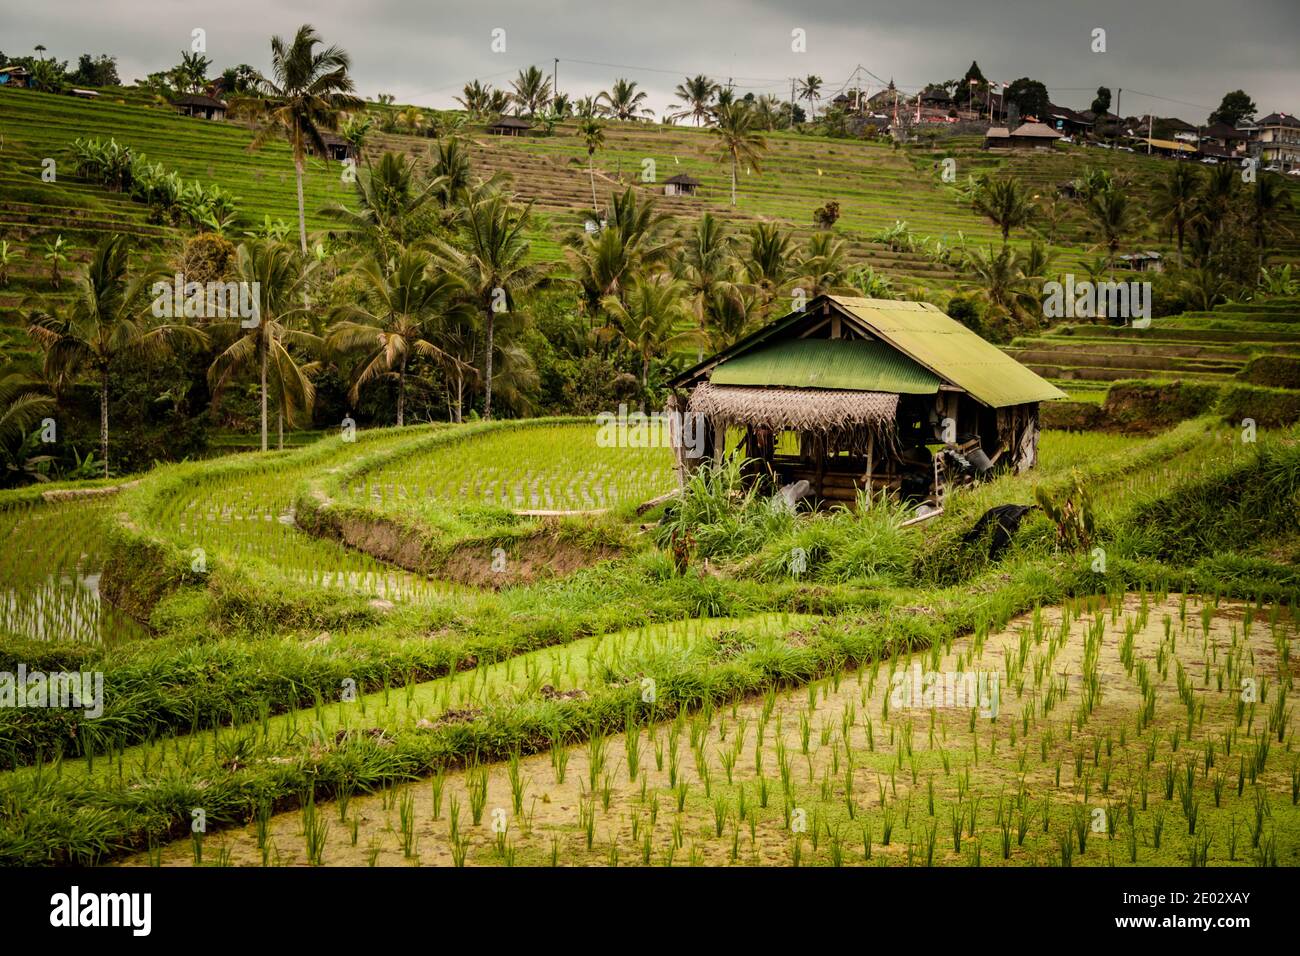 A shelter at Jatiluwih Rice Terrace in Bali Stock Photo